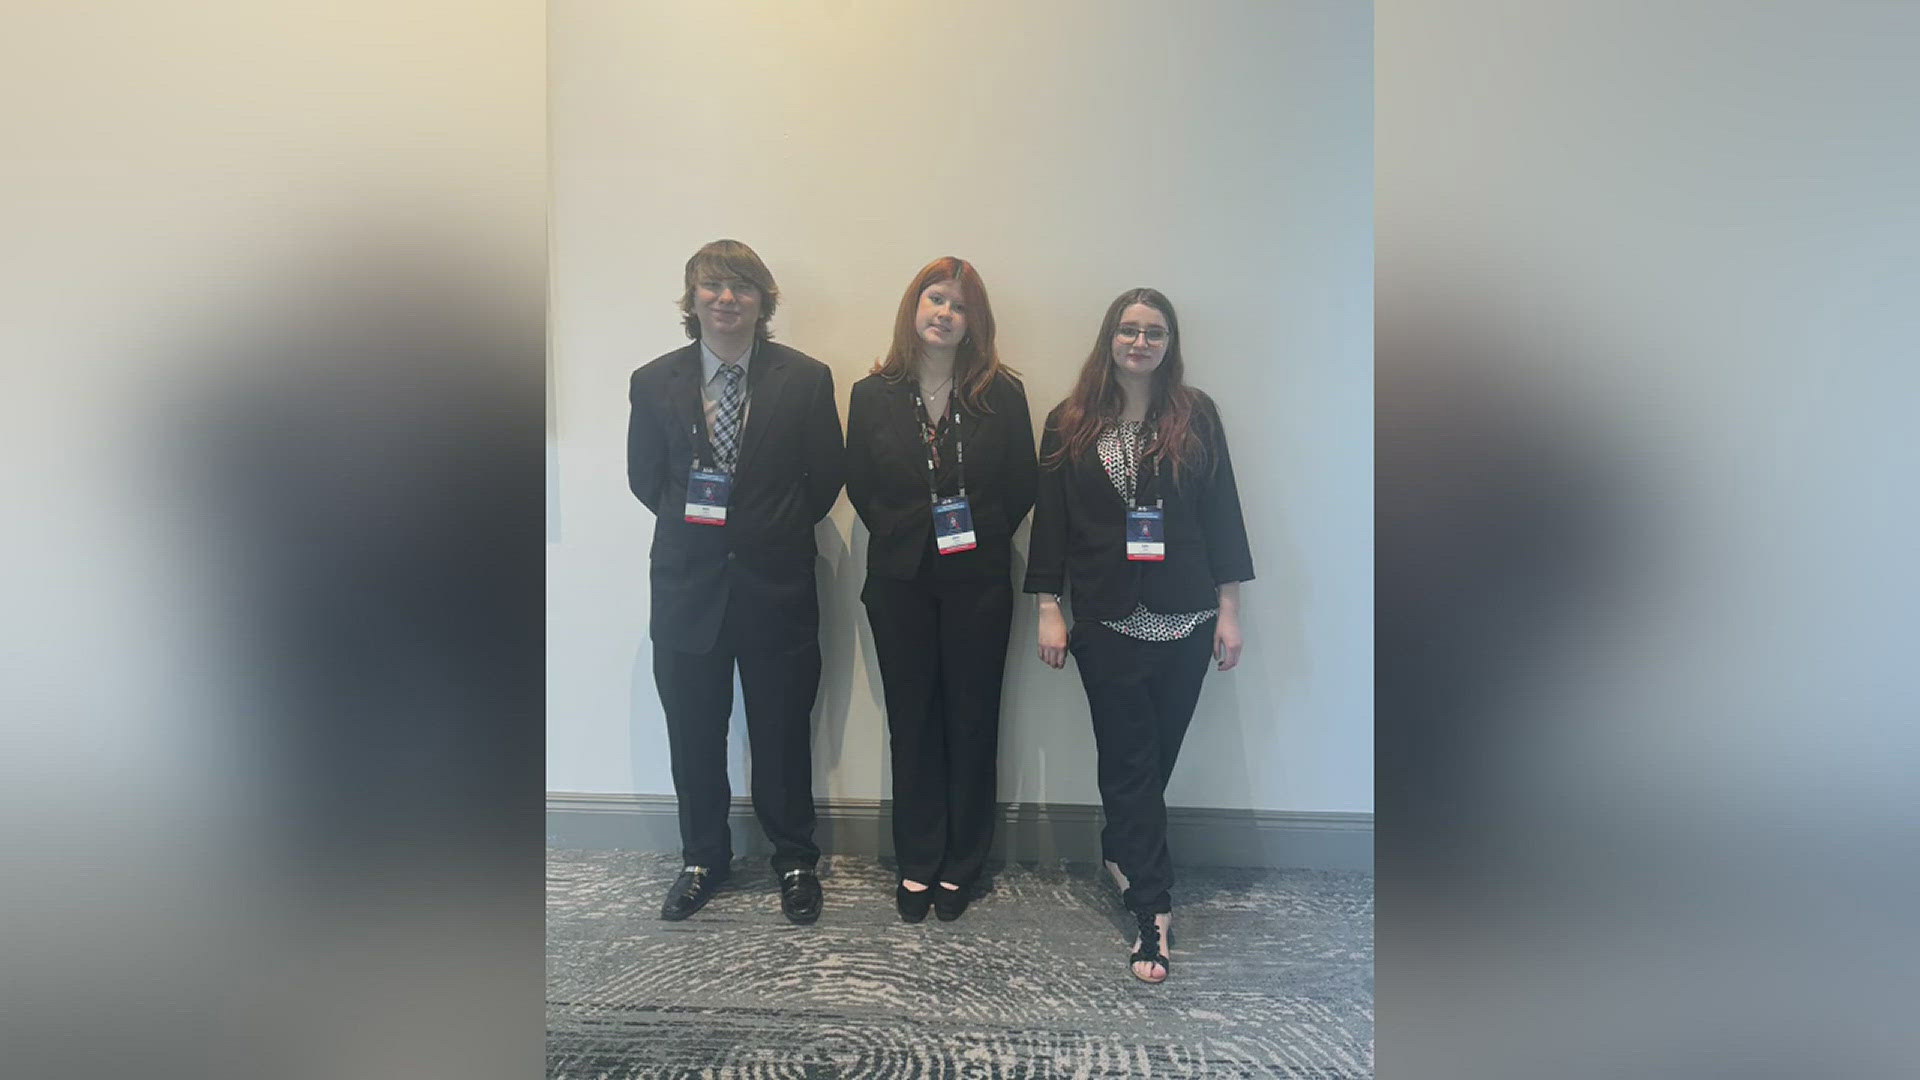 The students' project focused on reducing overdose deaths in their community. It placed third at the National Career Development Conference.